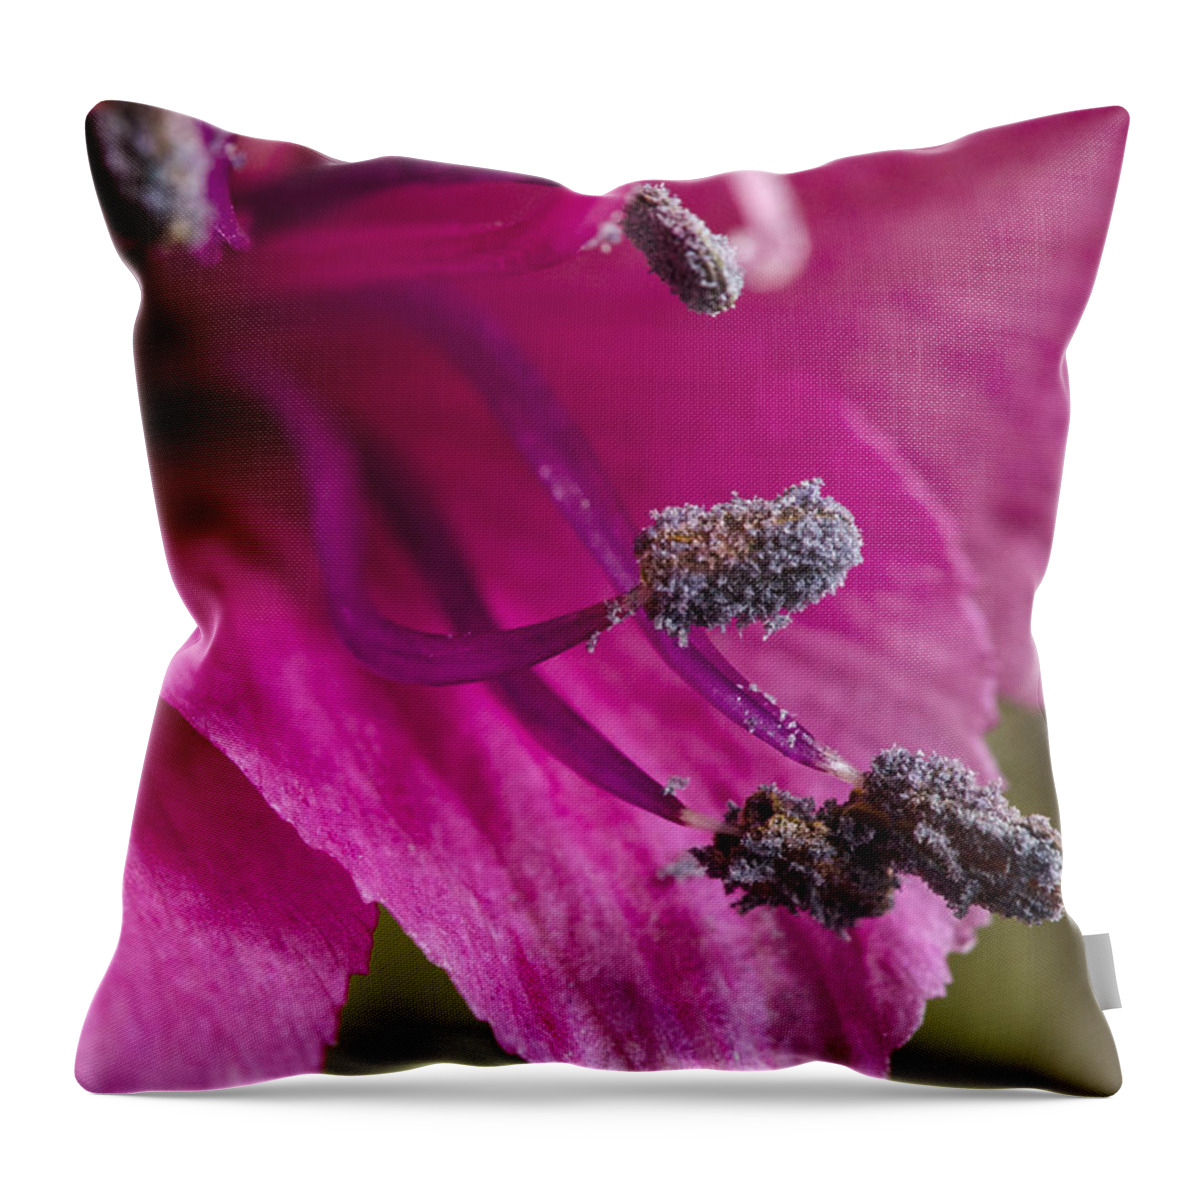 Floral Throw Pillow featuring the photograph Eating Crackers In Bed by Sandra Parlow